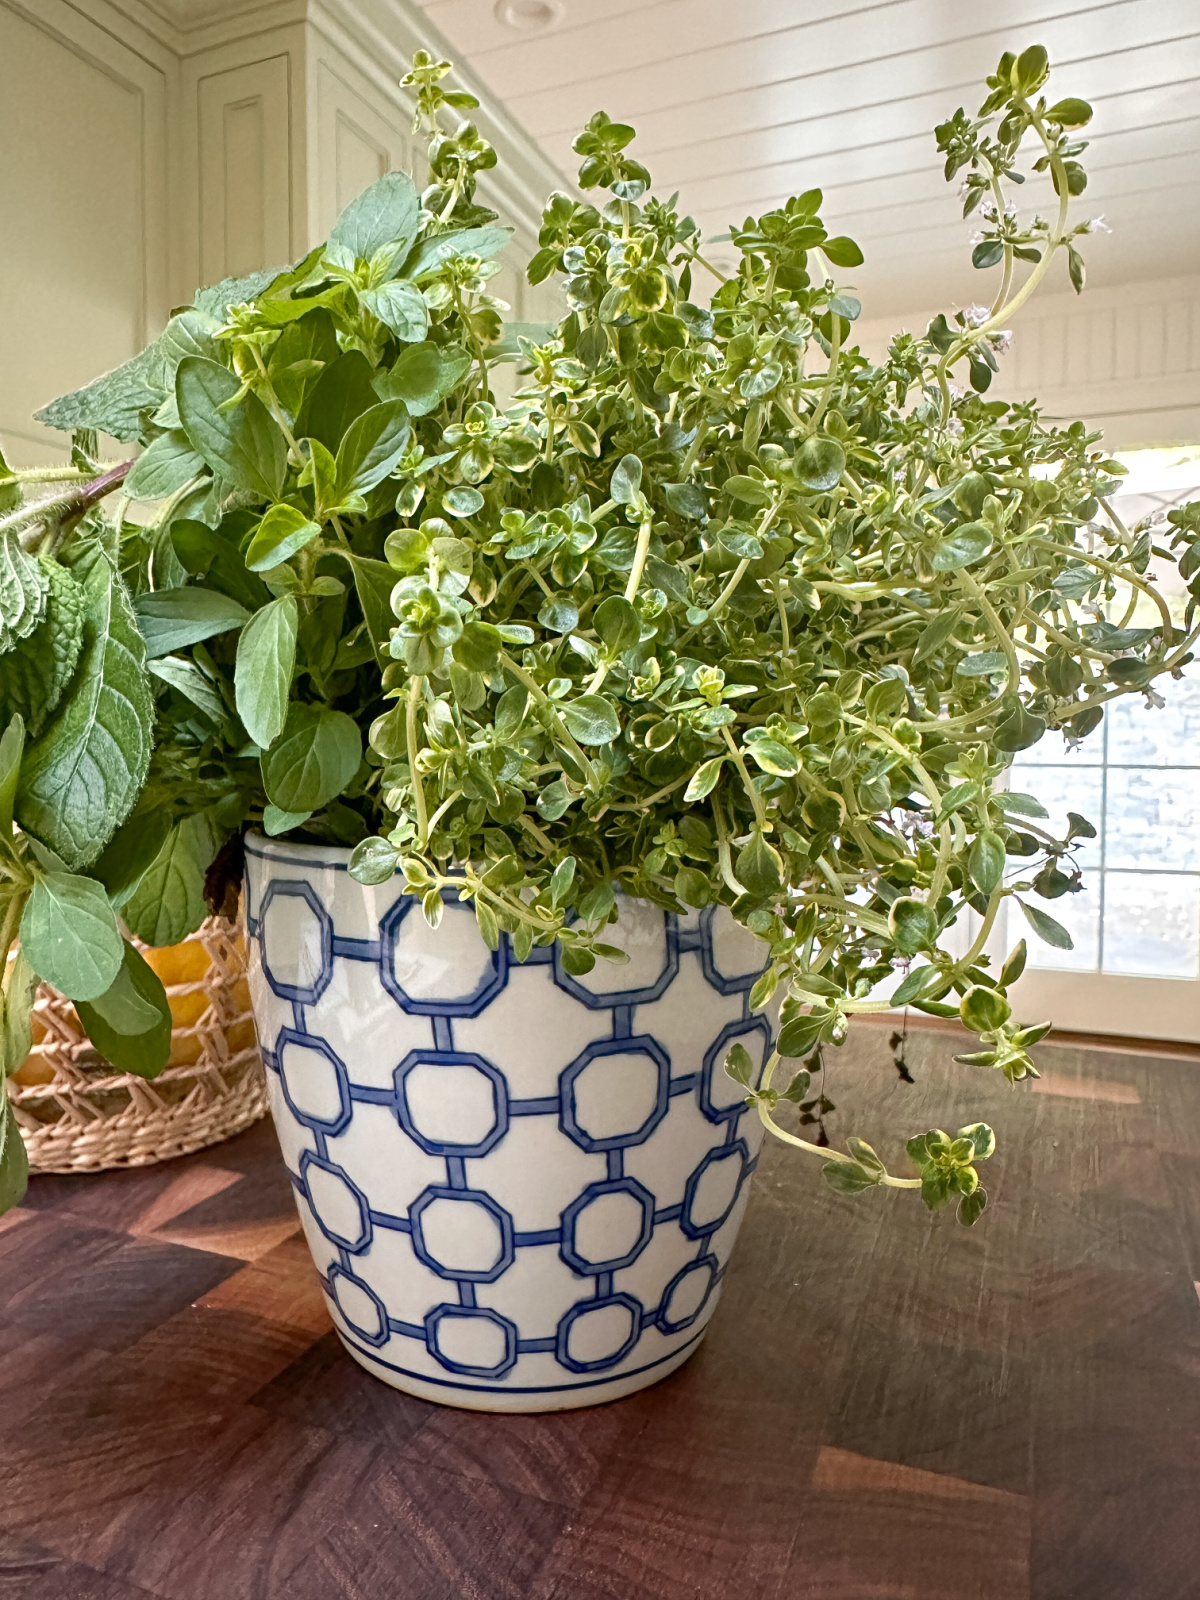 Blue and white planter filled with herbs.